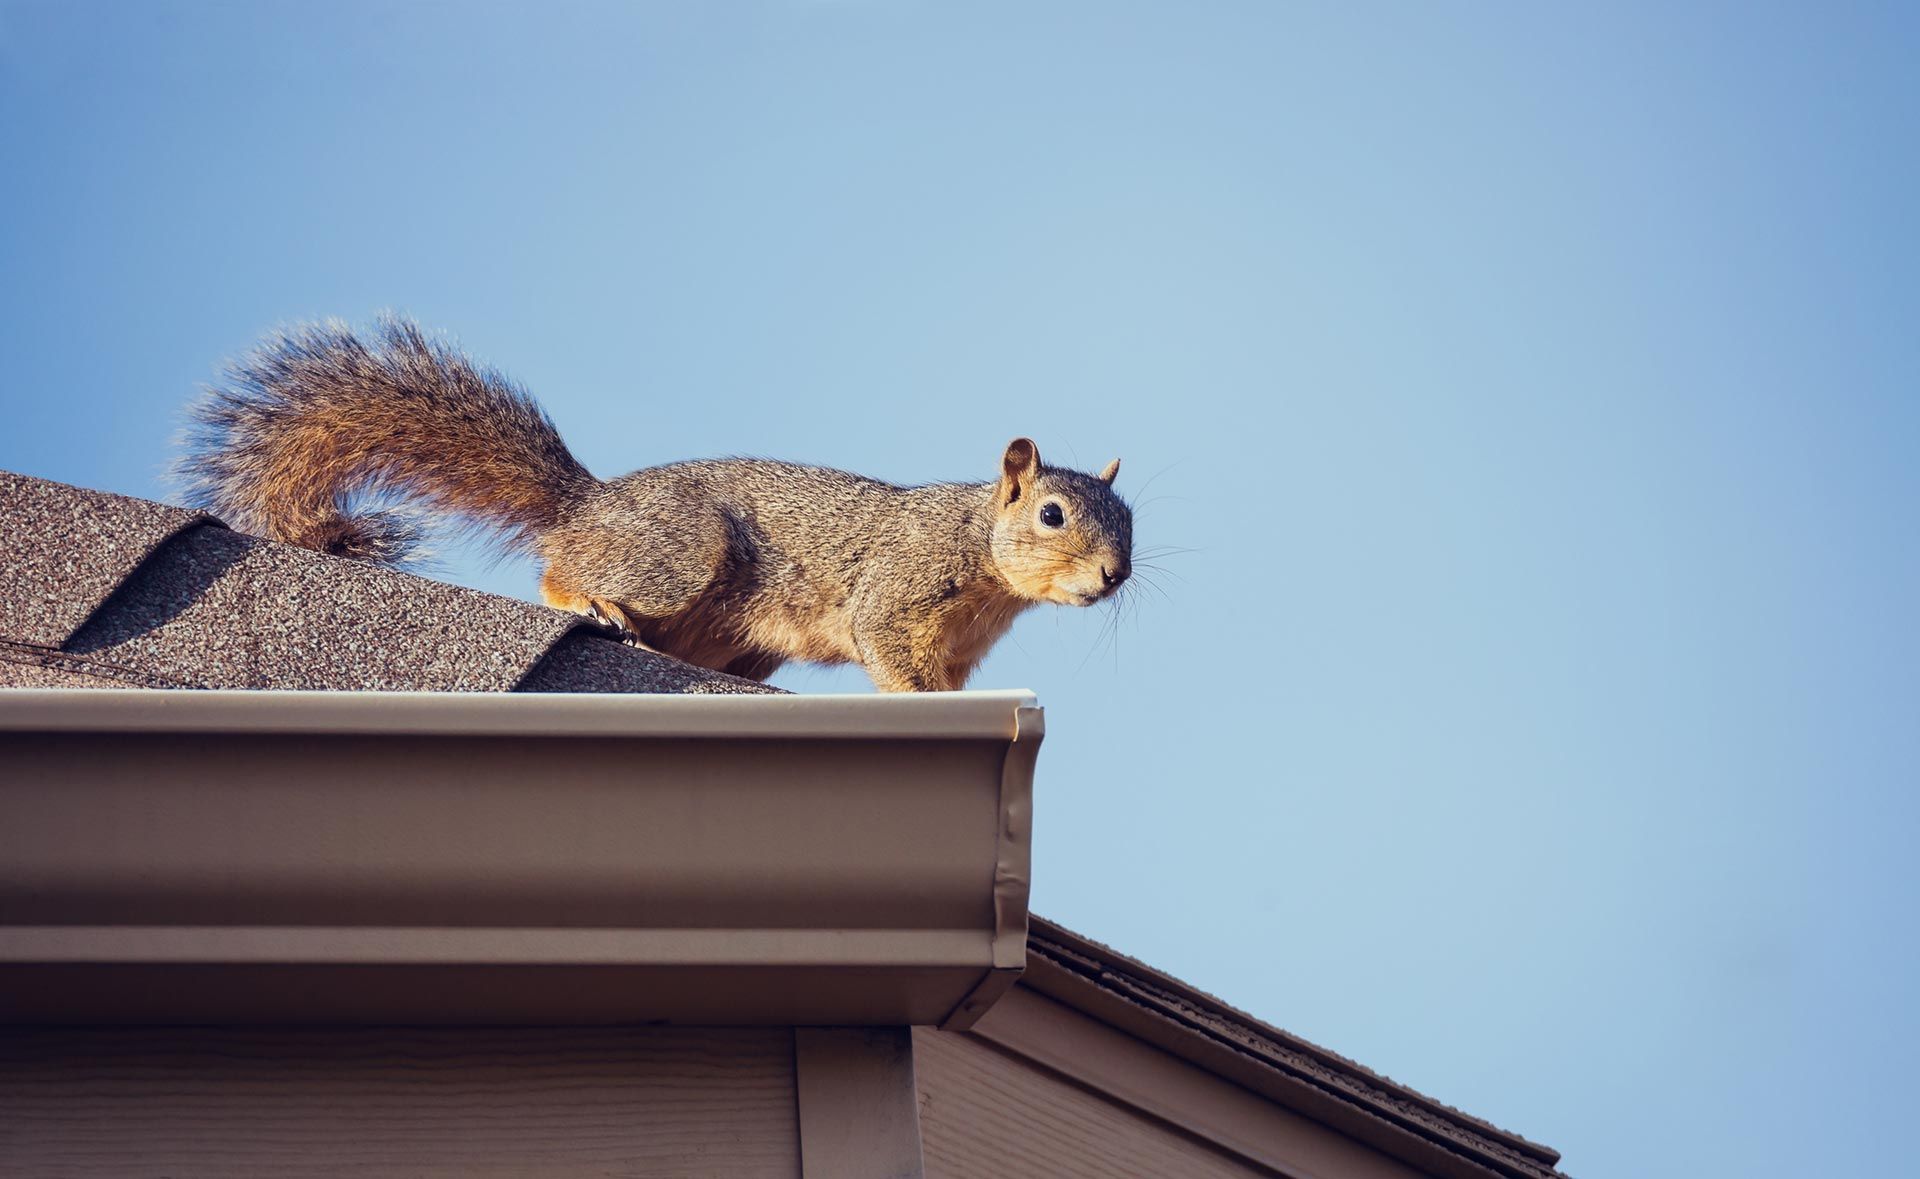 Pilgrim Pest Professionals is a squirrel trapper and offers squirrel removal, squirrel control, and squirrel exclusion services.